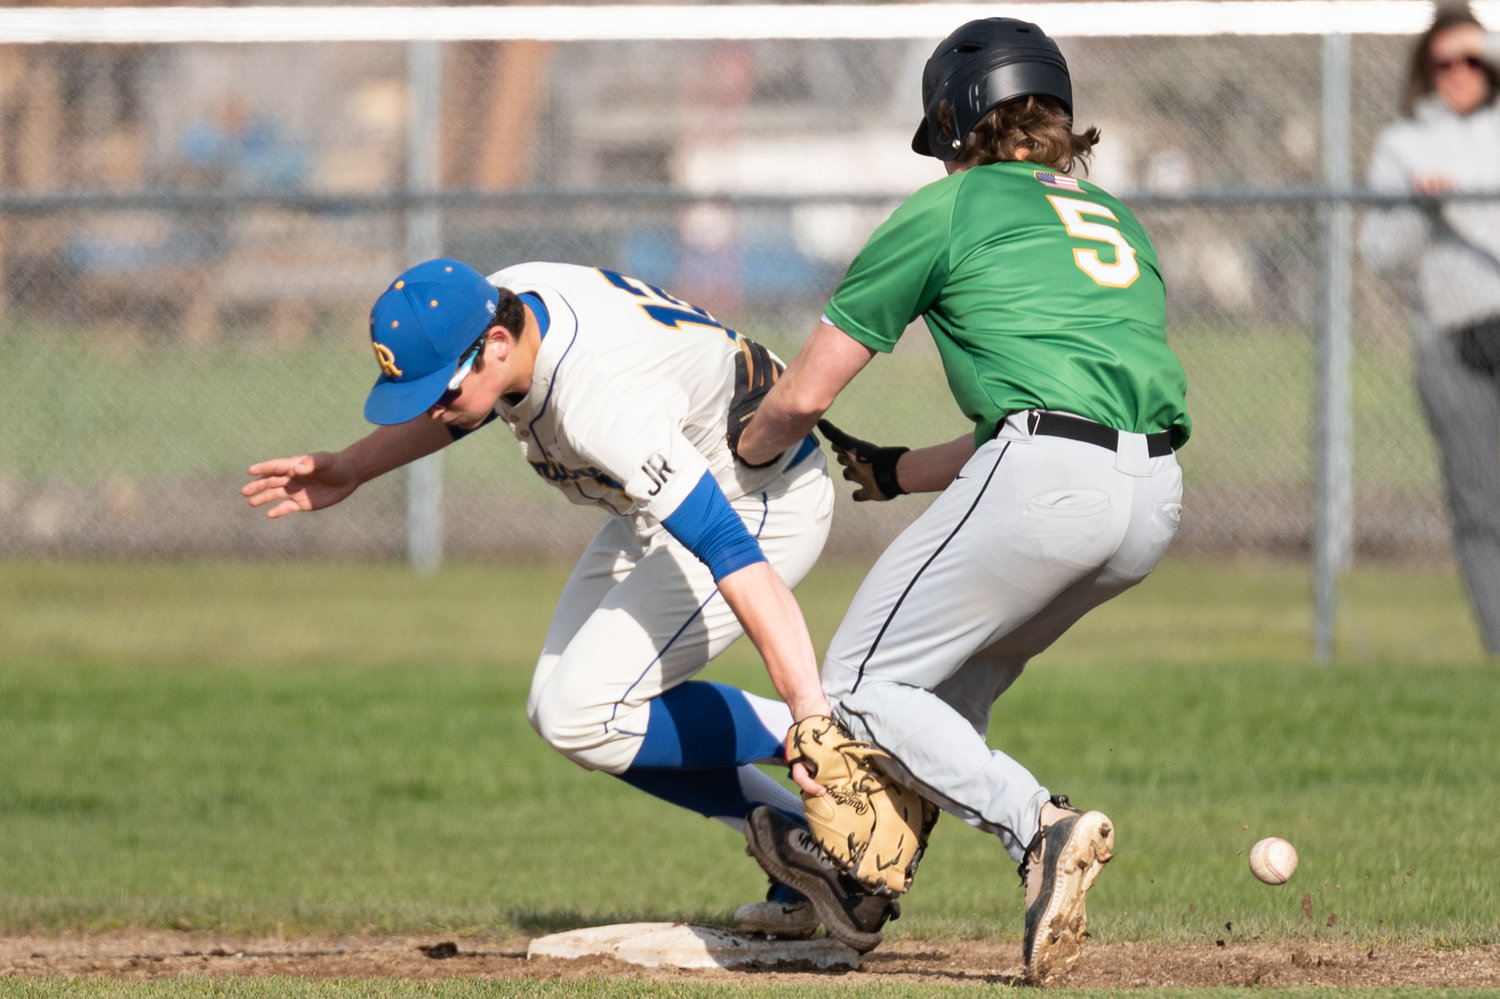 Rochester first baseman Garren Smith is plowed in to by Tumwater's Kyler Collier while trying to handle an errant throw. Collier was ruled safe and drove in two runs on the play.